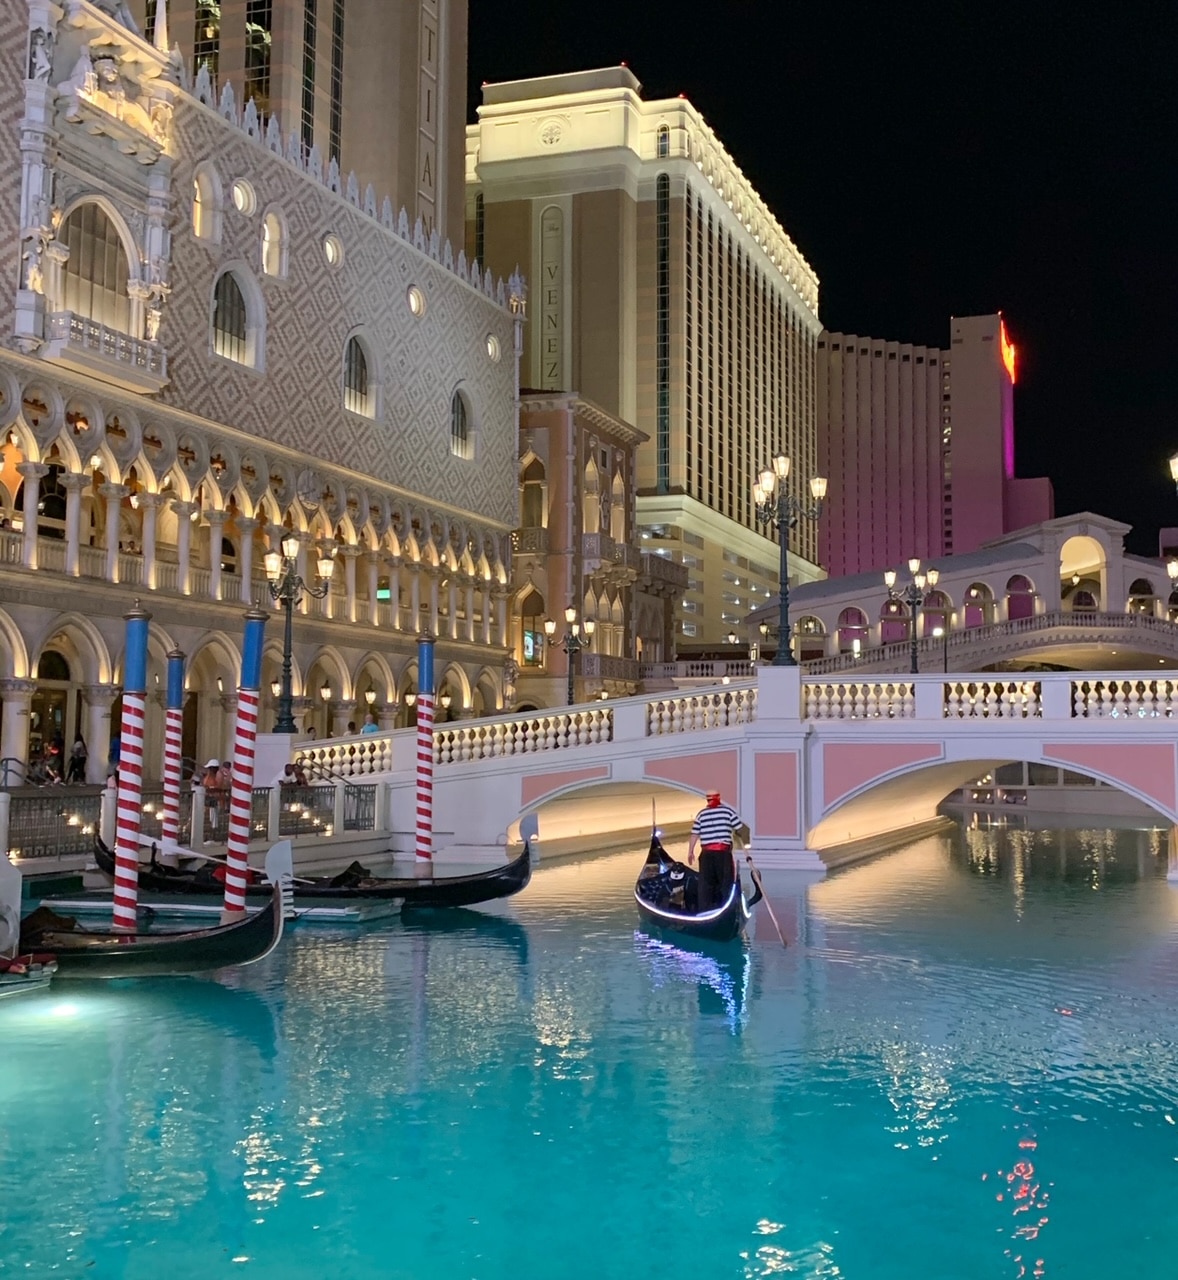 The Canal Shoppes at the Venetian